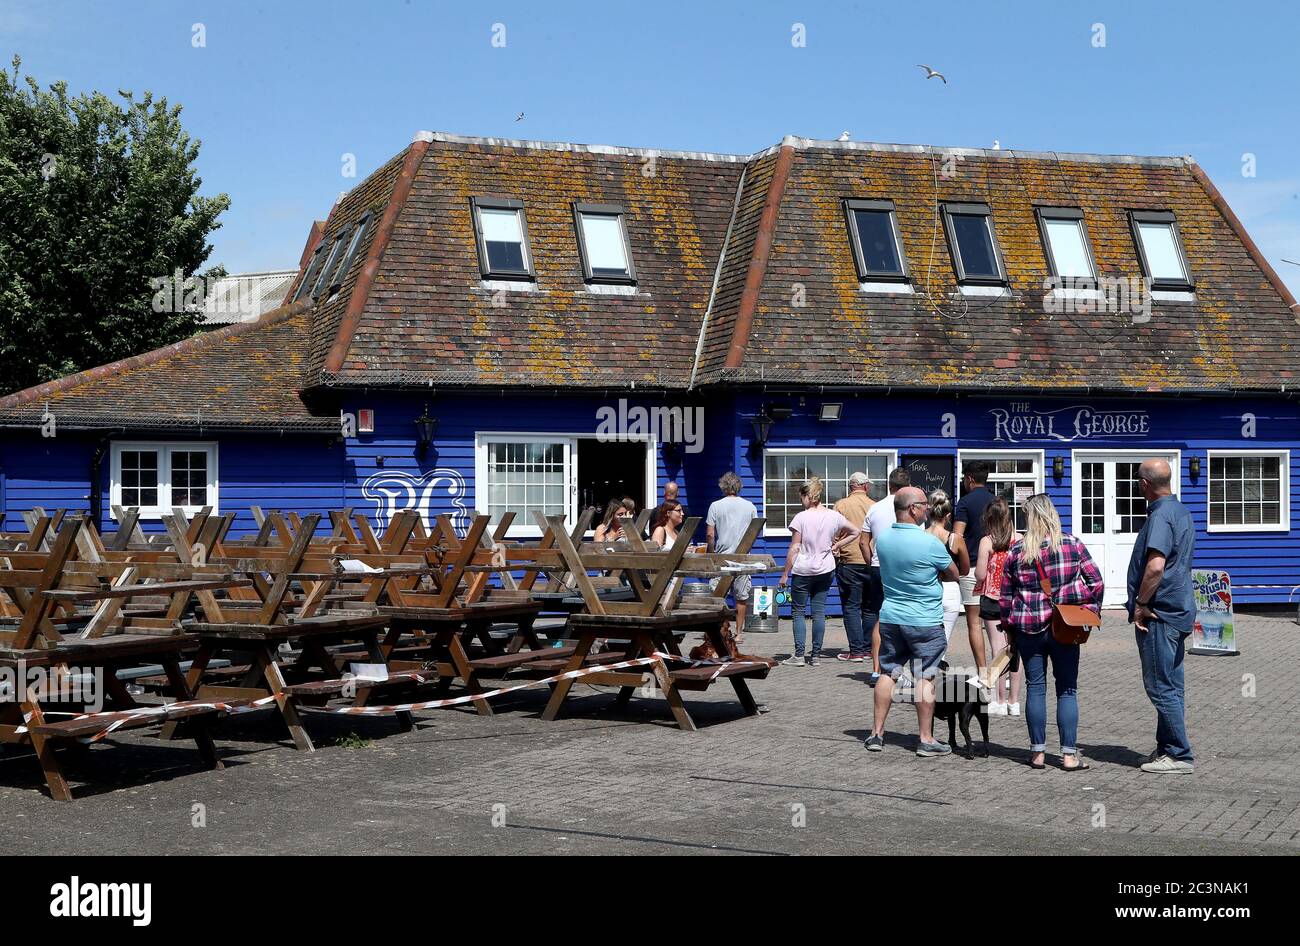 People queue for drinks in the beer garden of the Royal George pub in Folkestone Kent. Stock Photo